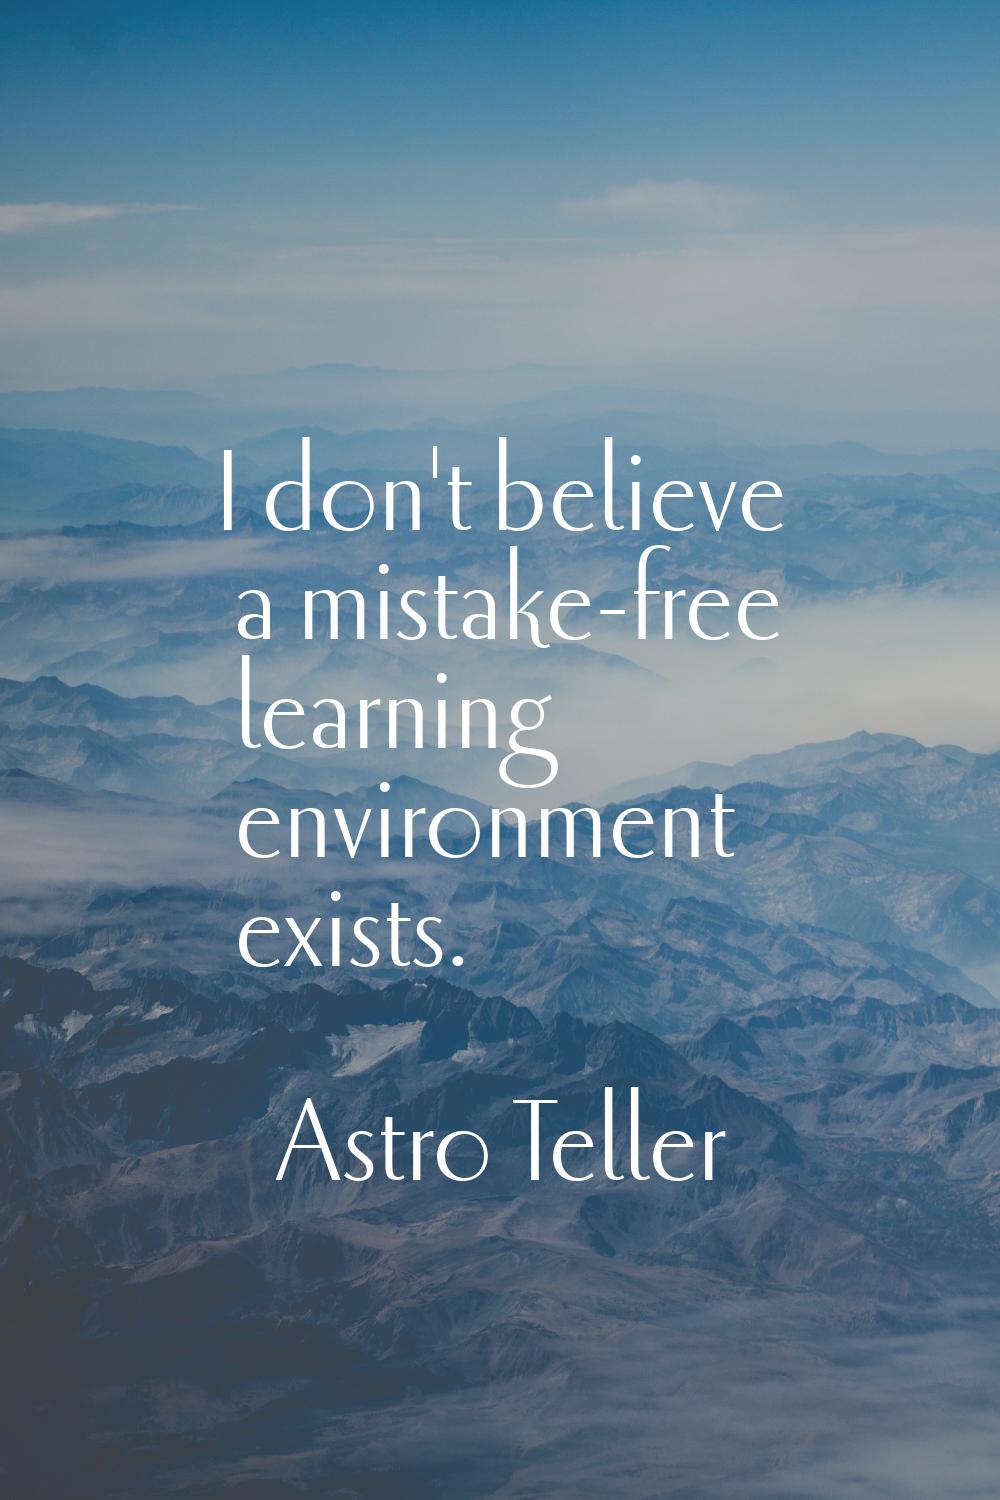 I don't believe a mistake-free learning environment exists.